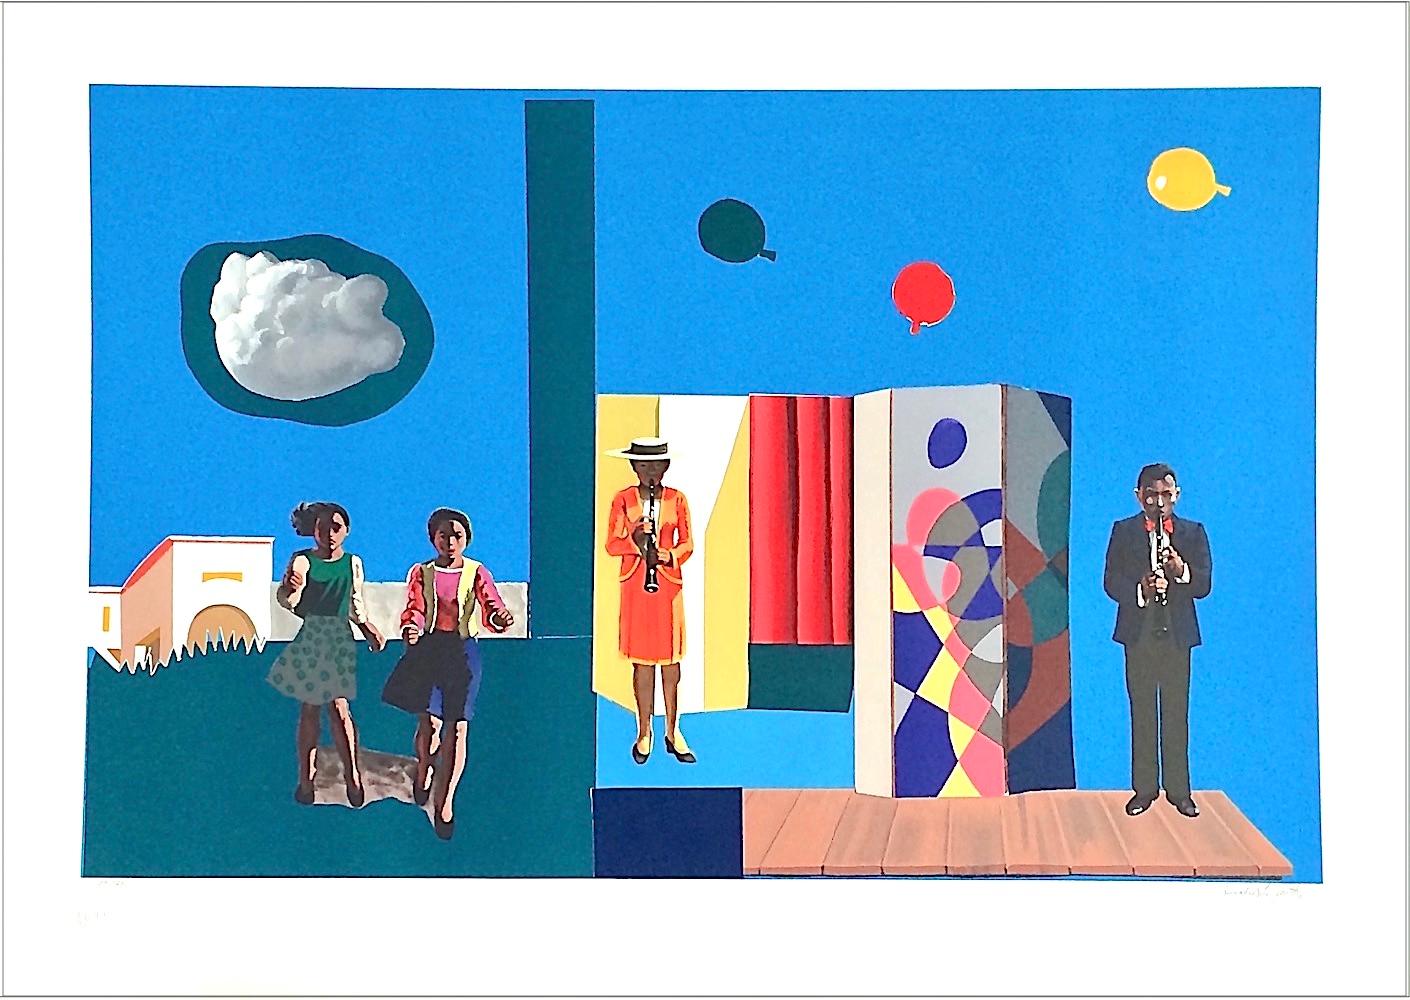 FUGUE Signed Lithograph, Figurative Collage, Musicians, Girls, Balloons - Contemporary Print by Hughie Lee-Smith